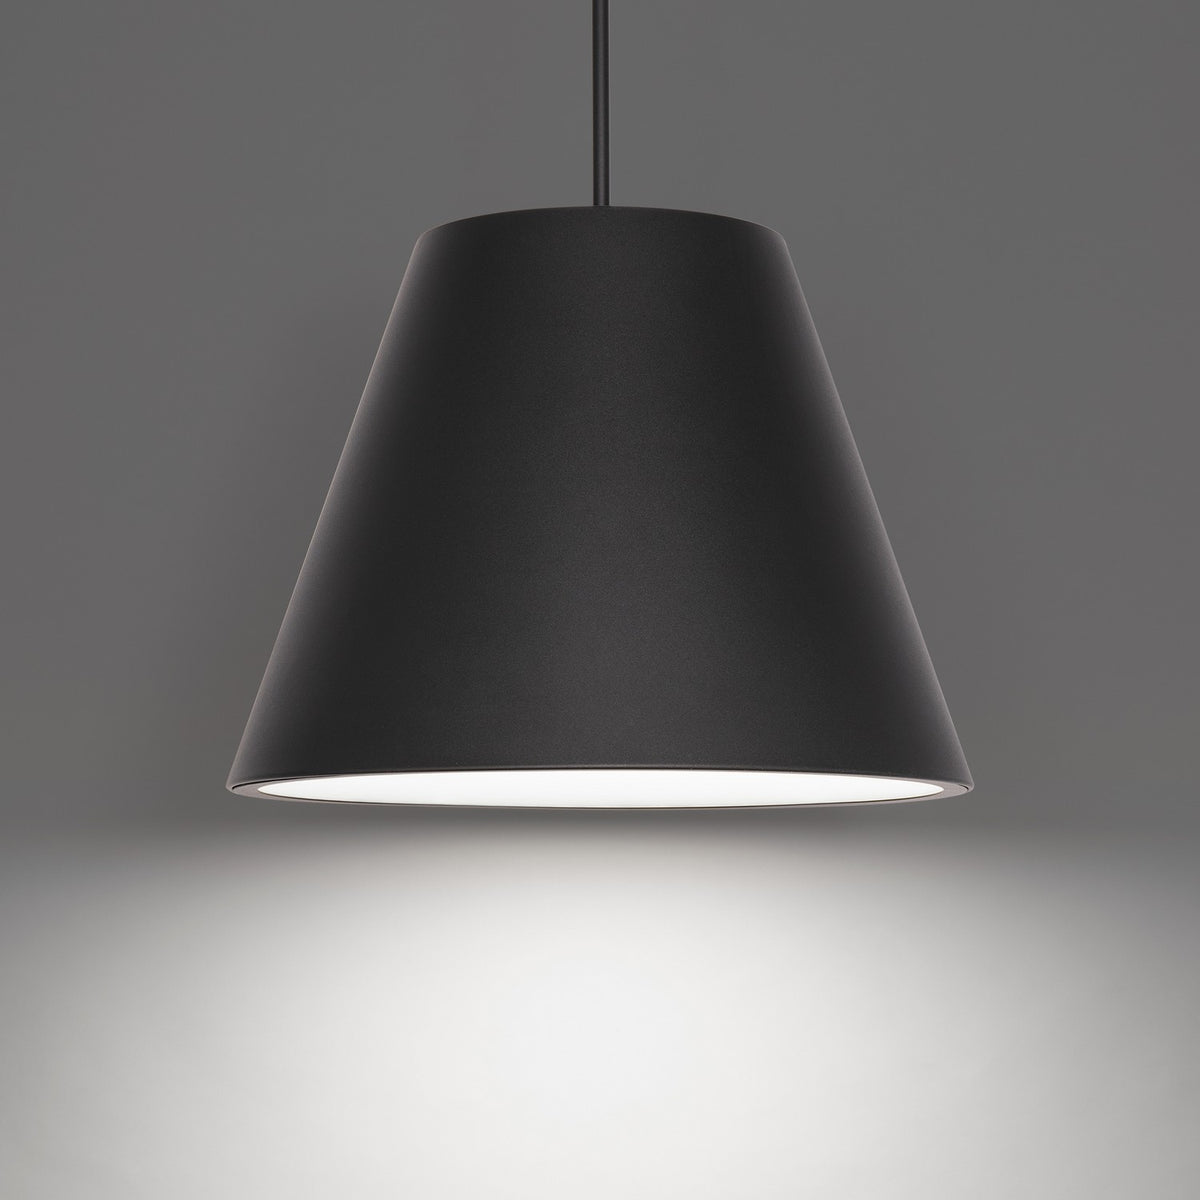 Modern Forms Canada - PD-W24320-35-BK - LED Outdoor Pendant - Myla - Black